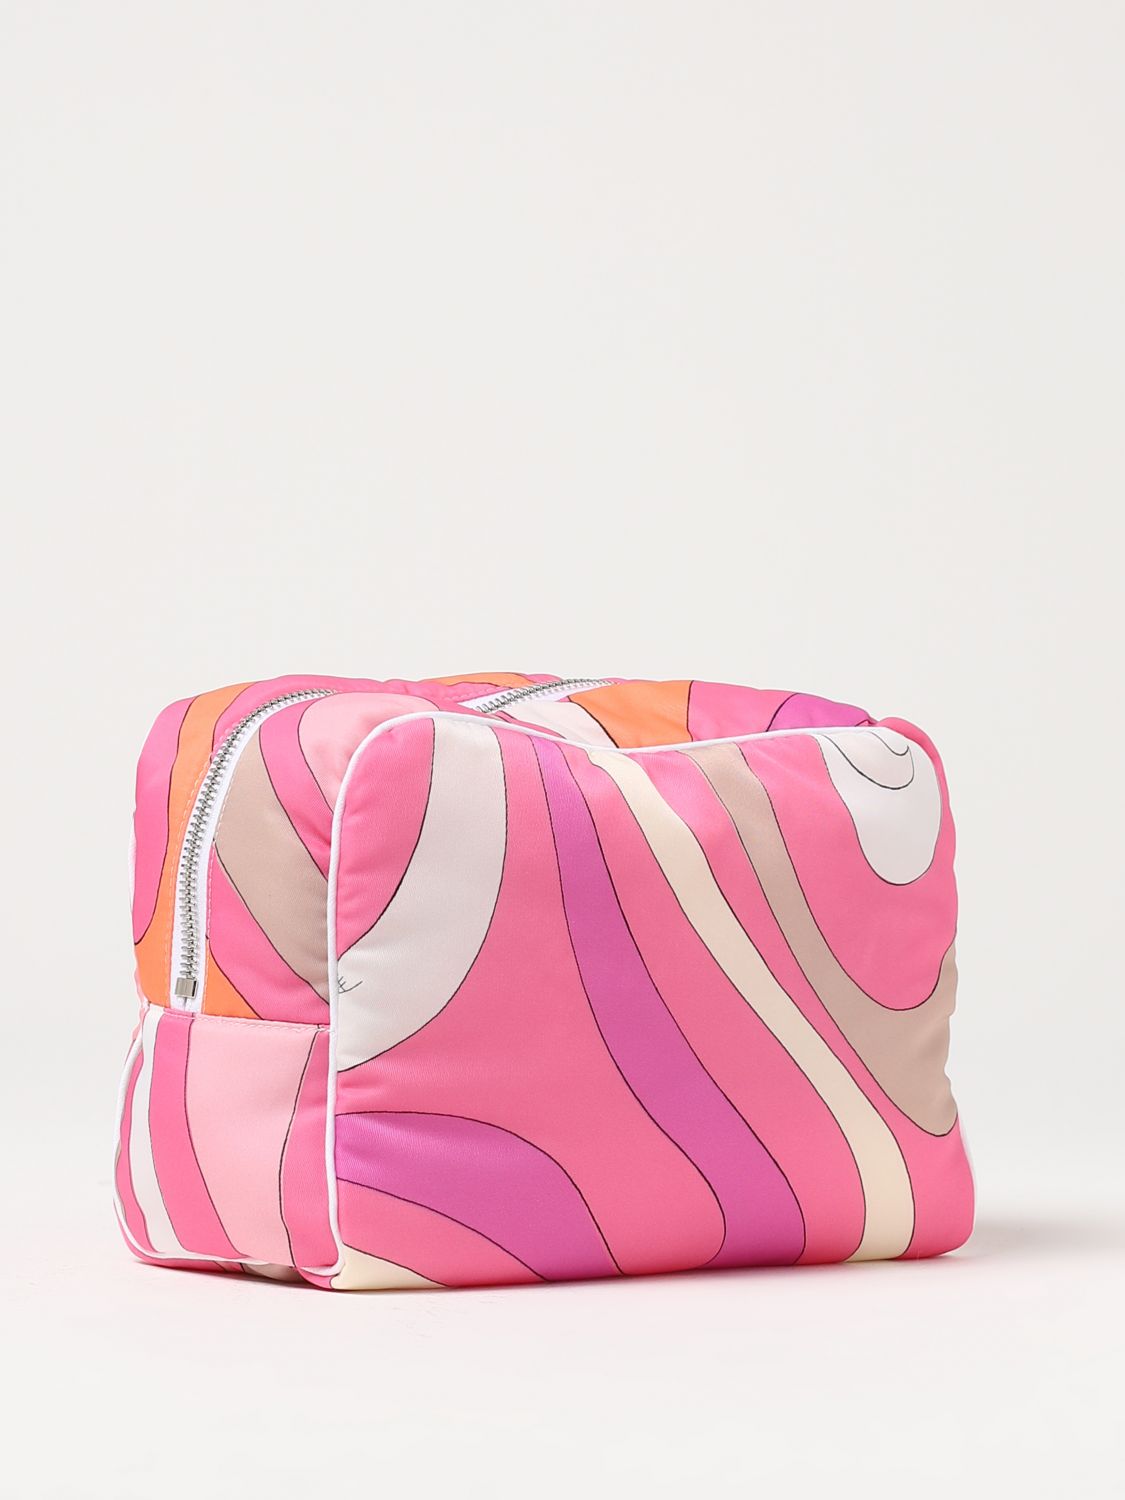 Emilio Pucci Printed Toiletry Bag in Pink